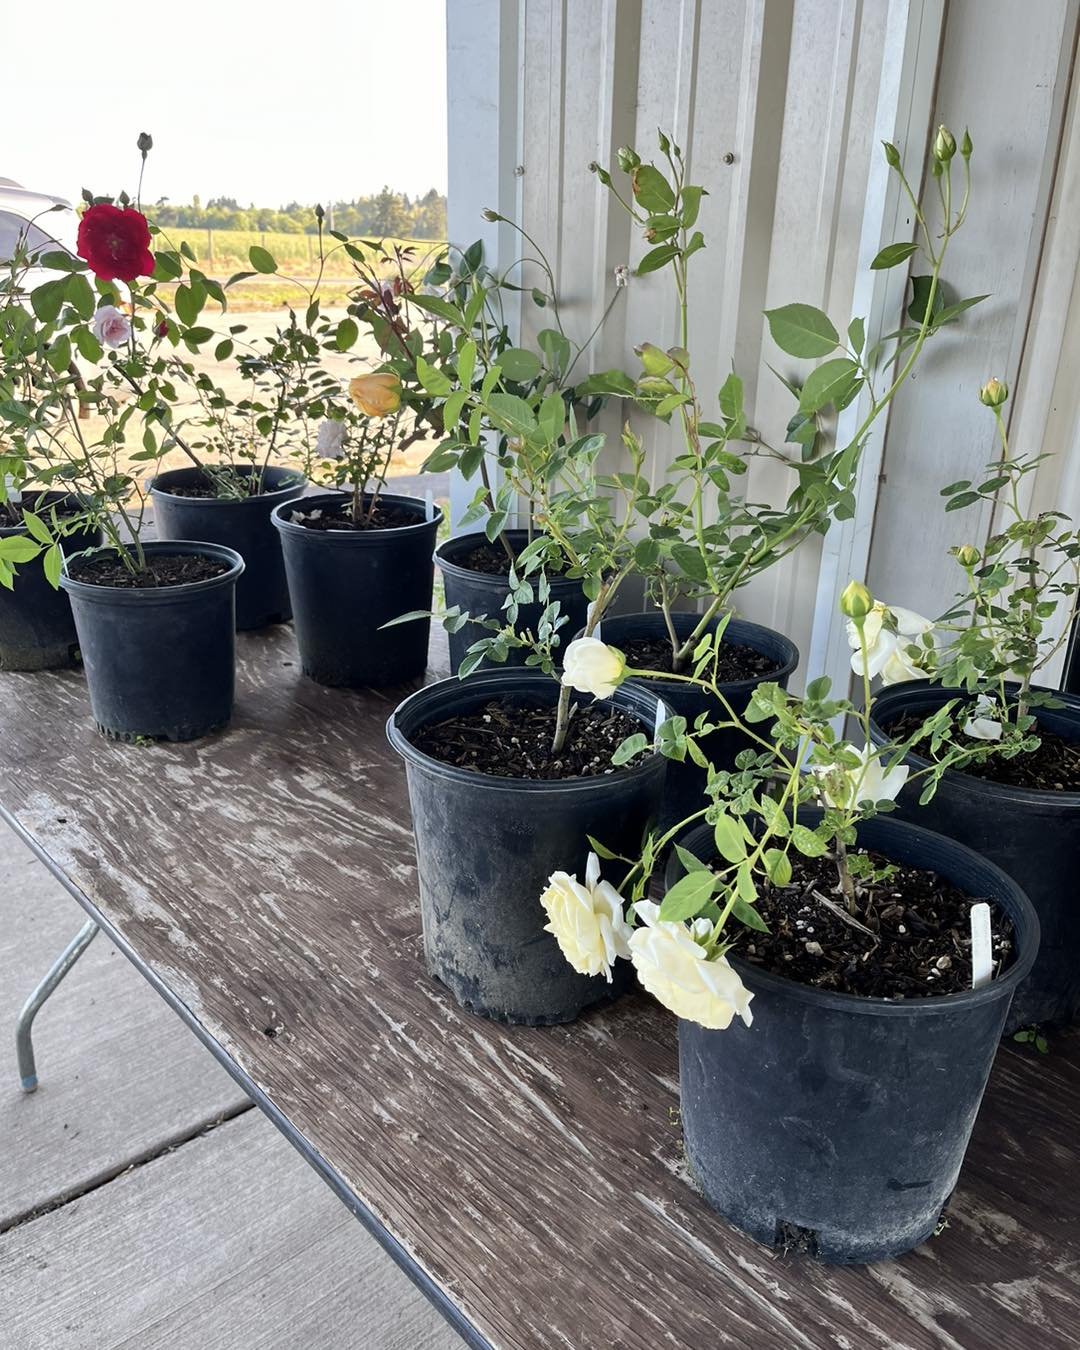 Mother&rsquo;s Day weekend rose sale! Treat your mom to a beautiful rose bush for the garden. Sale is on 2 gallon roses, normally $19 for only $15 today and Saturday! 

We have a great variety of beautiful, fragrant roses. Heirloom varieties, all own